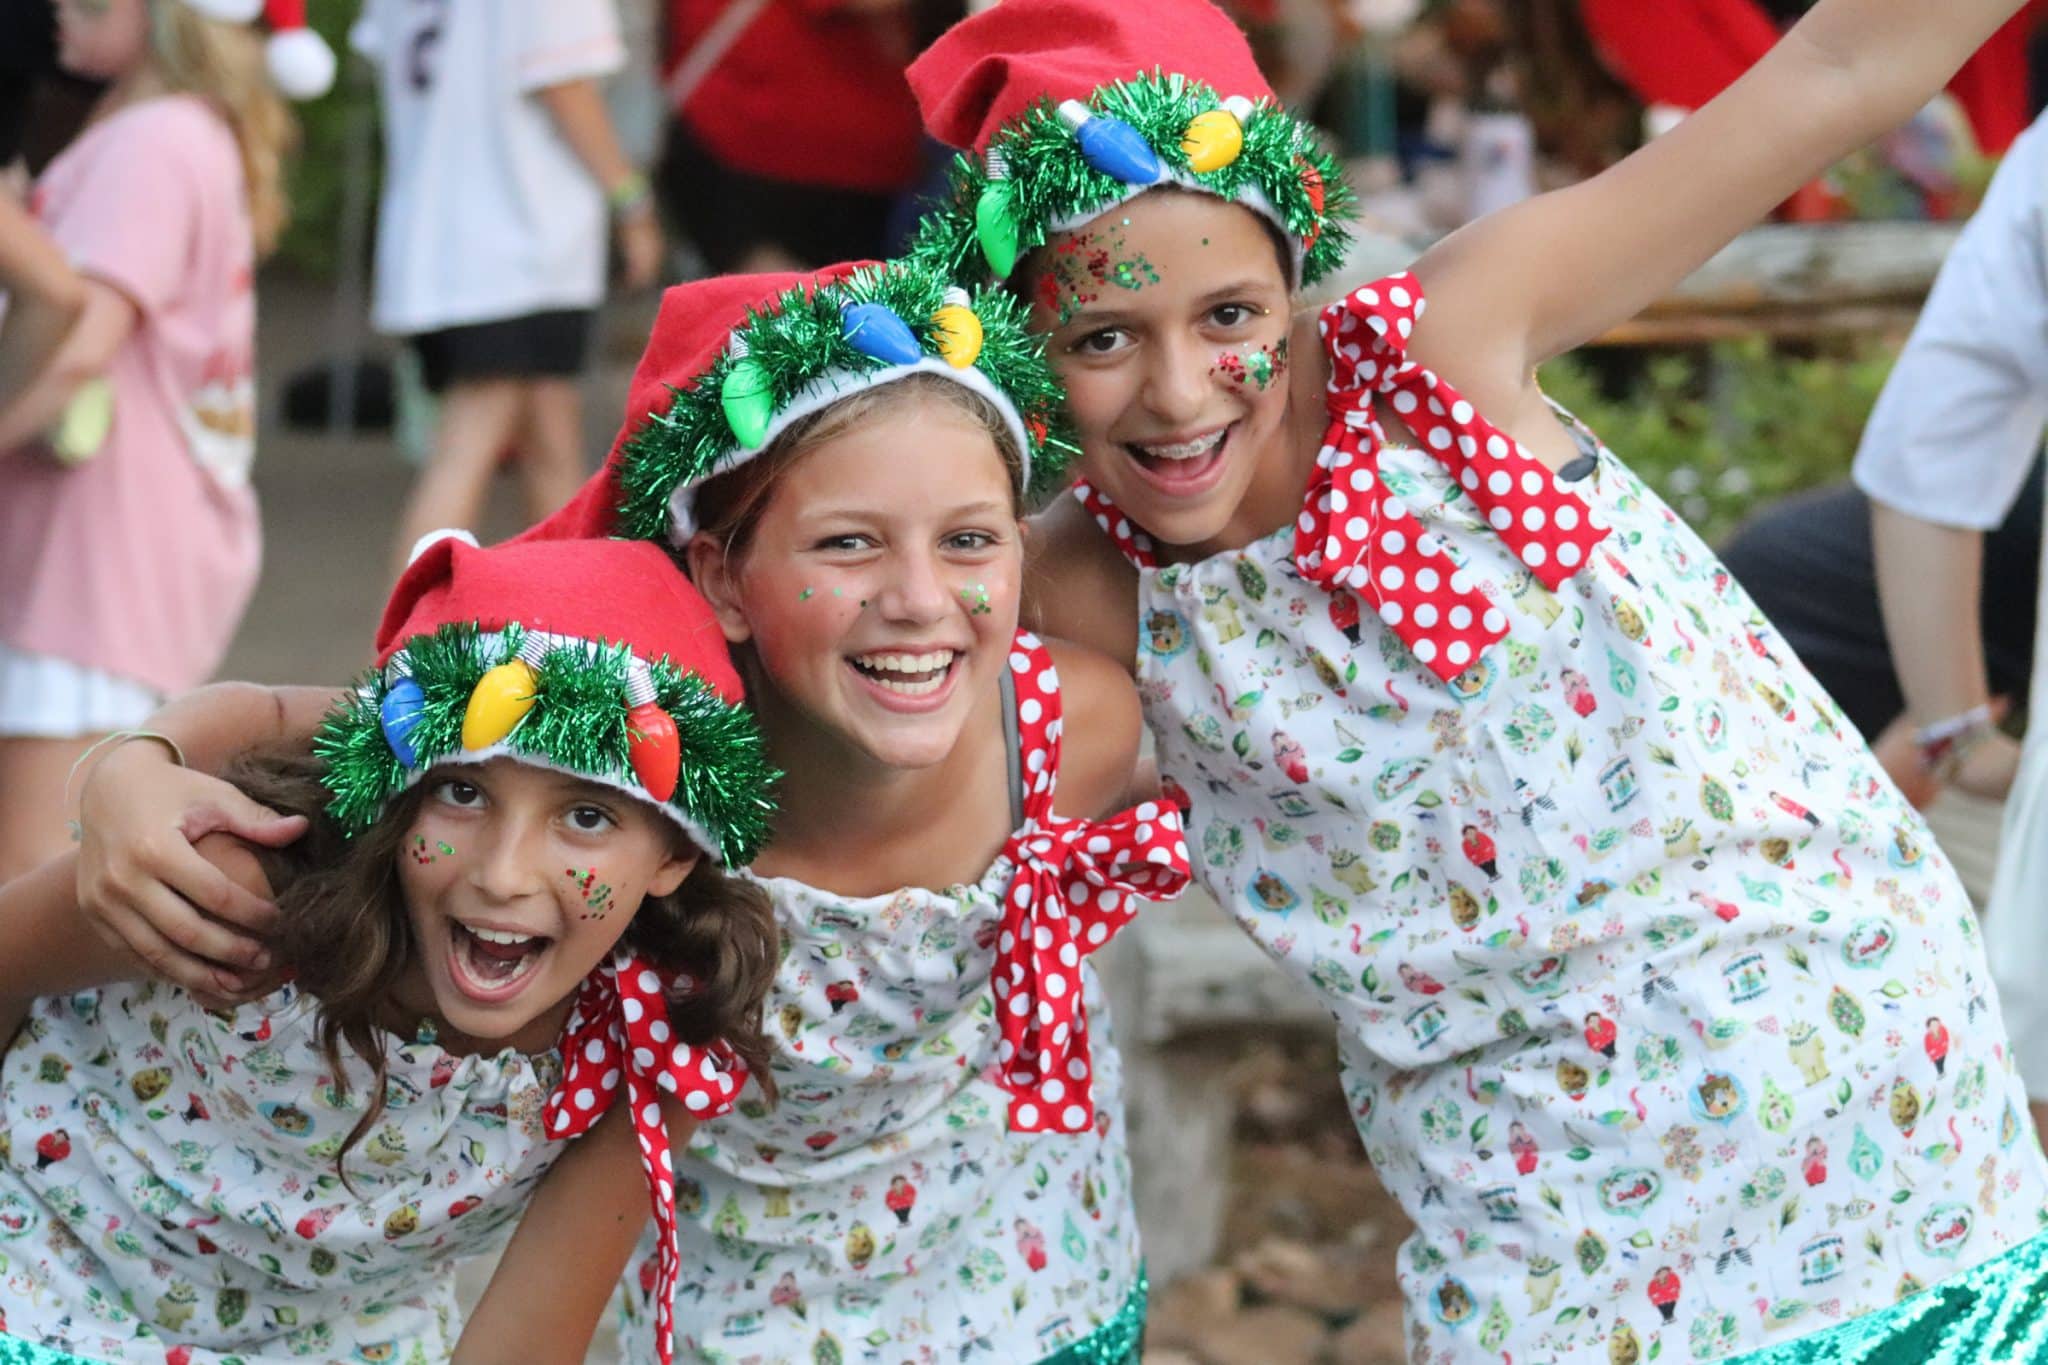 Girl campers dressed in matching Christmas outfits and hats.